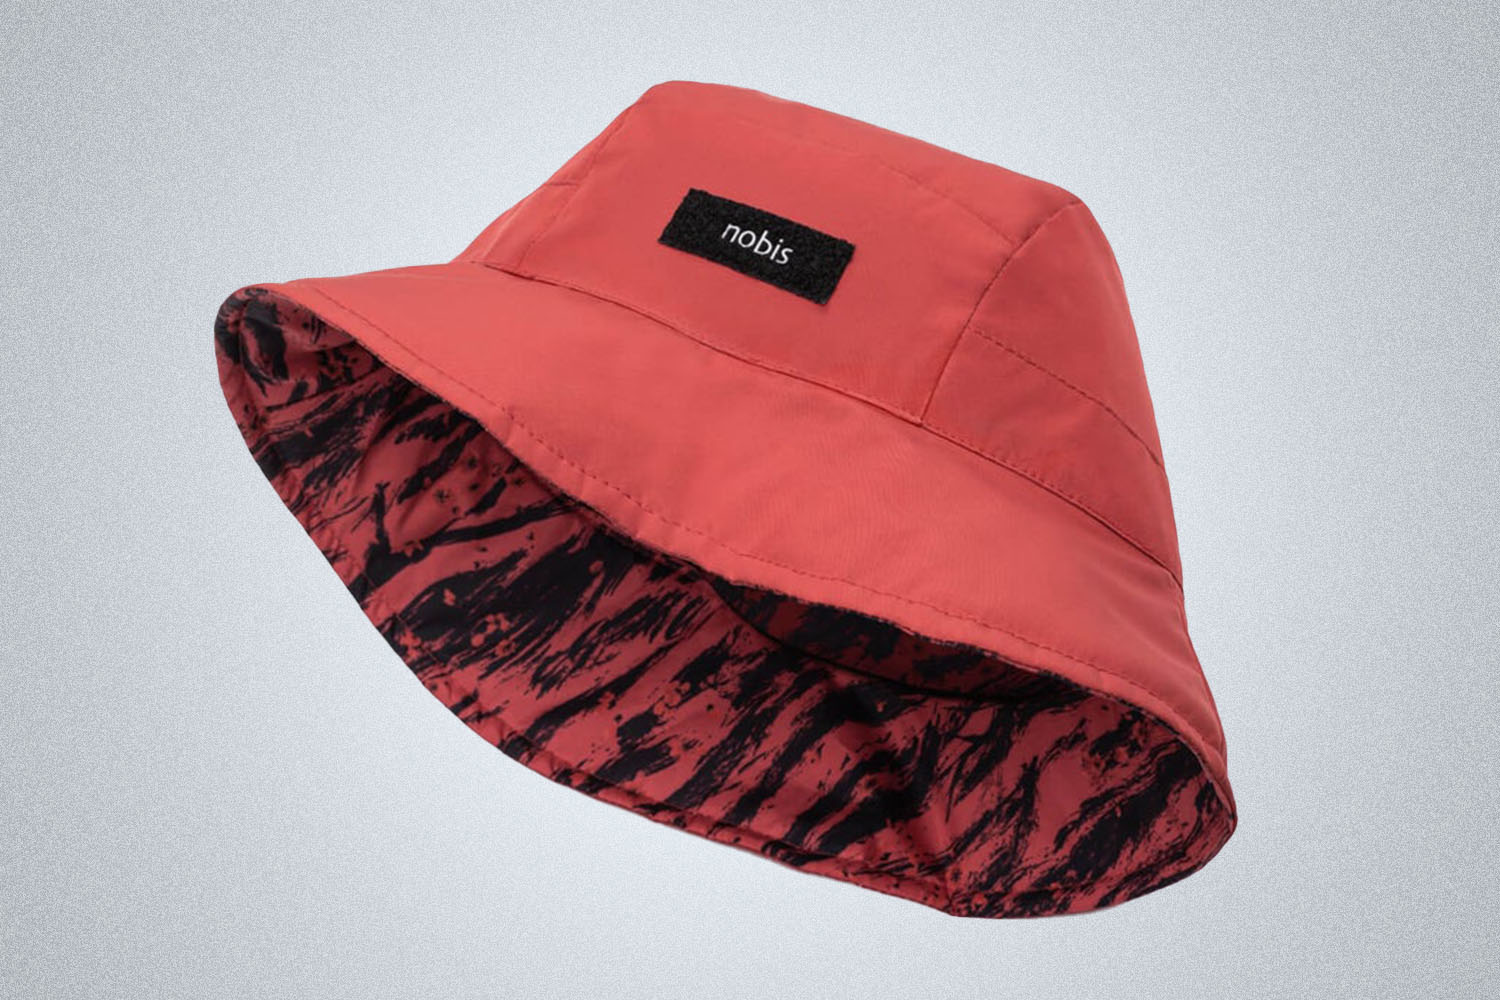 a reversible bucket hat with a plain red side and a red tiger print